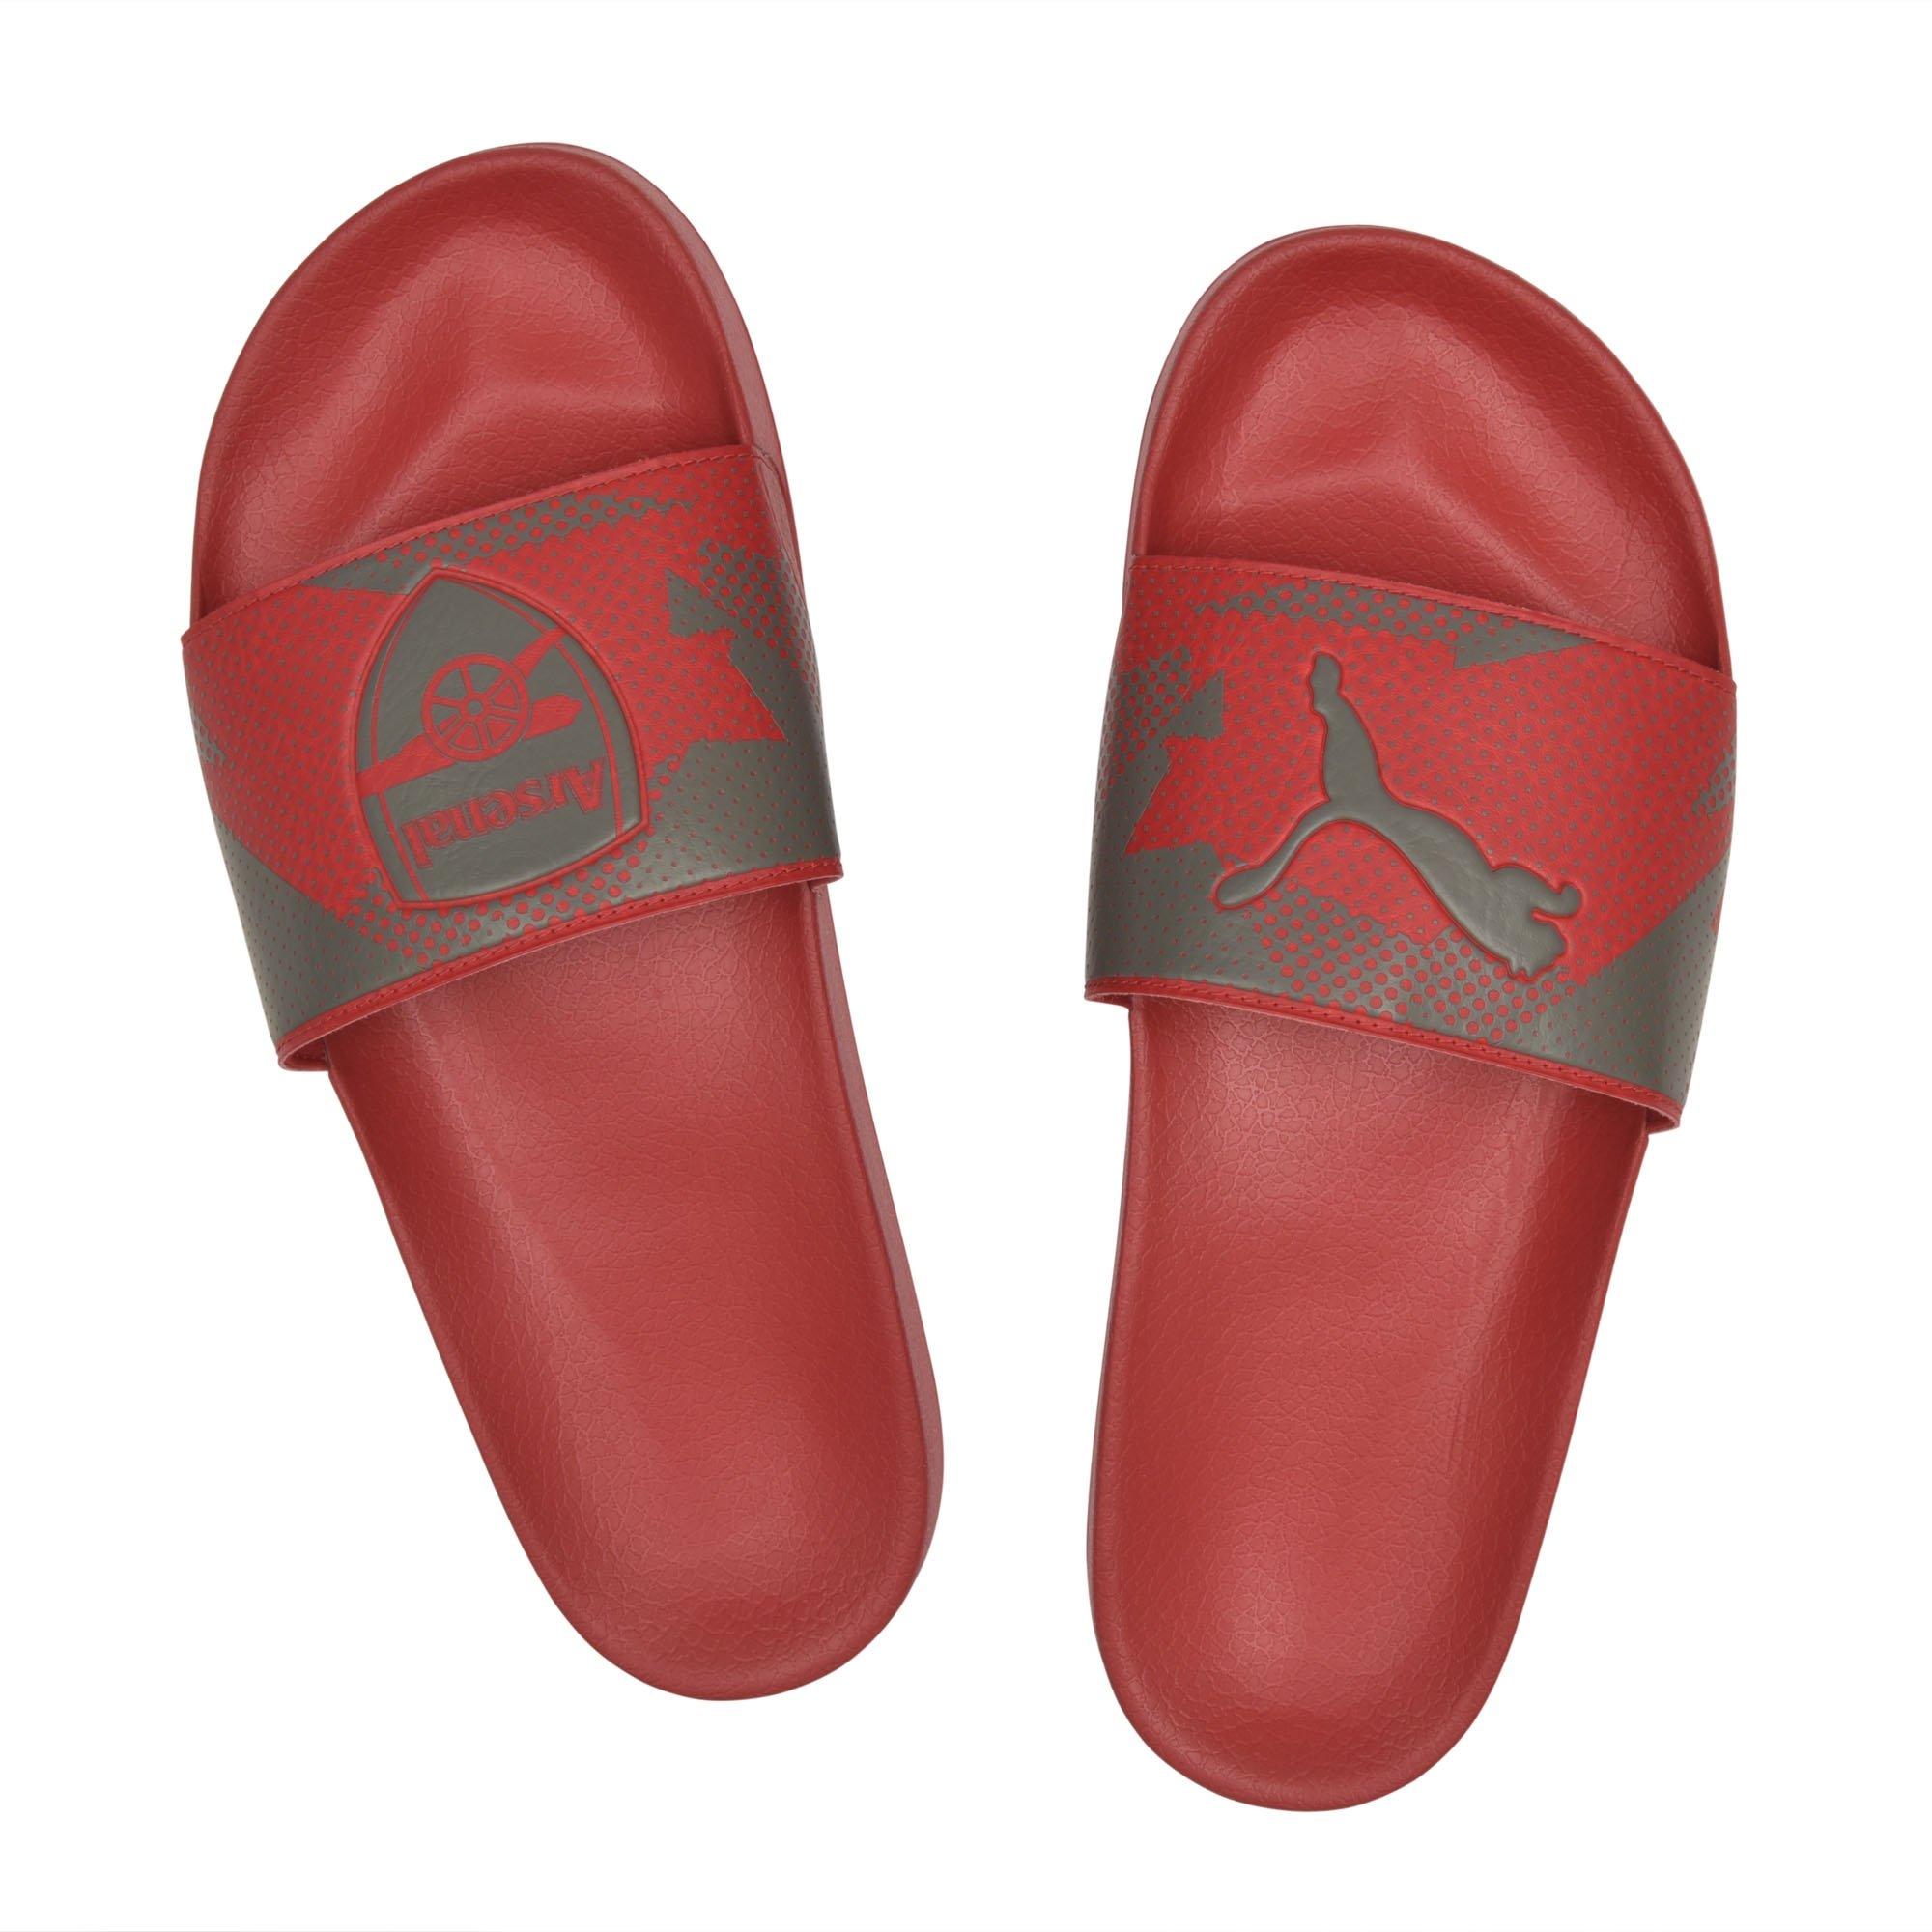 Arsenal 17/18 Camo Red Slide | The 